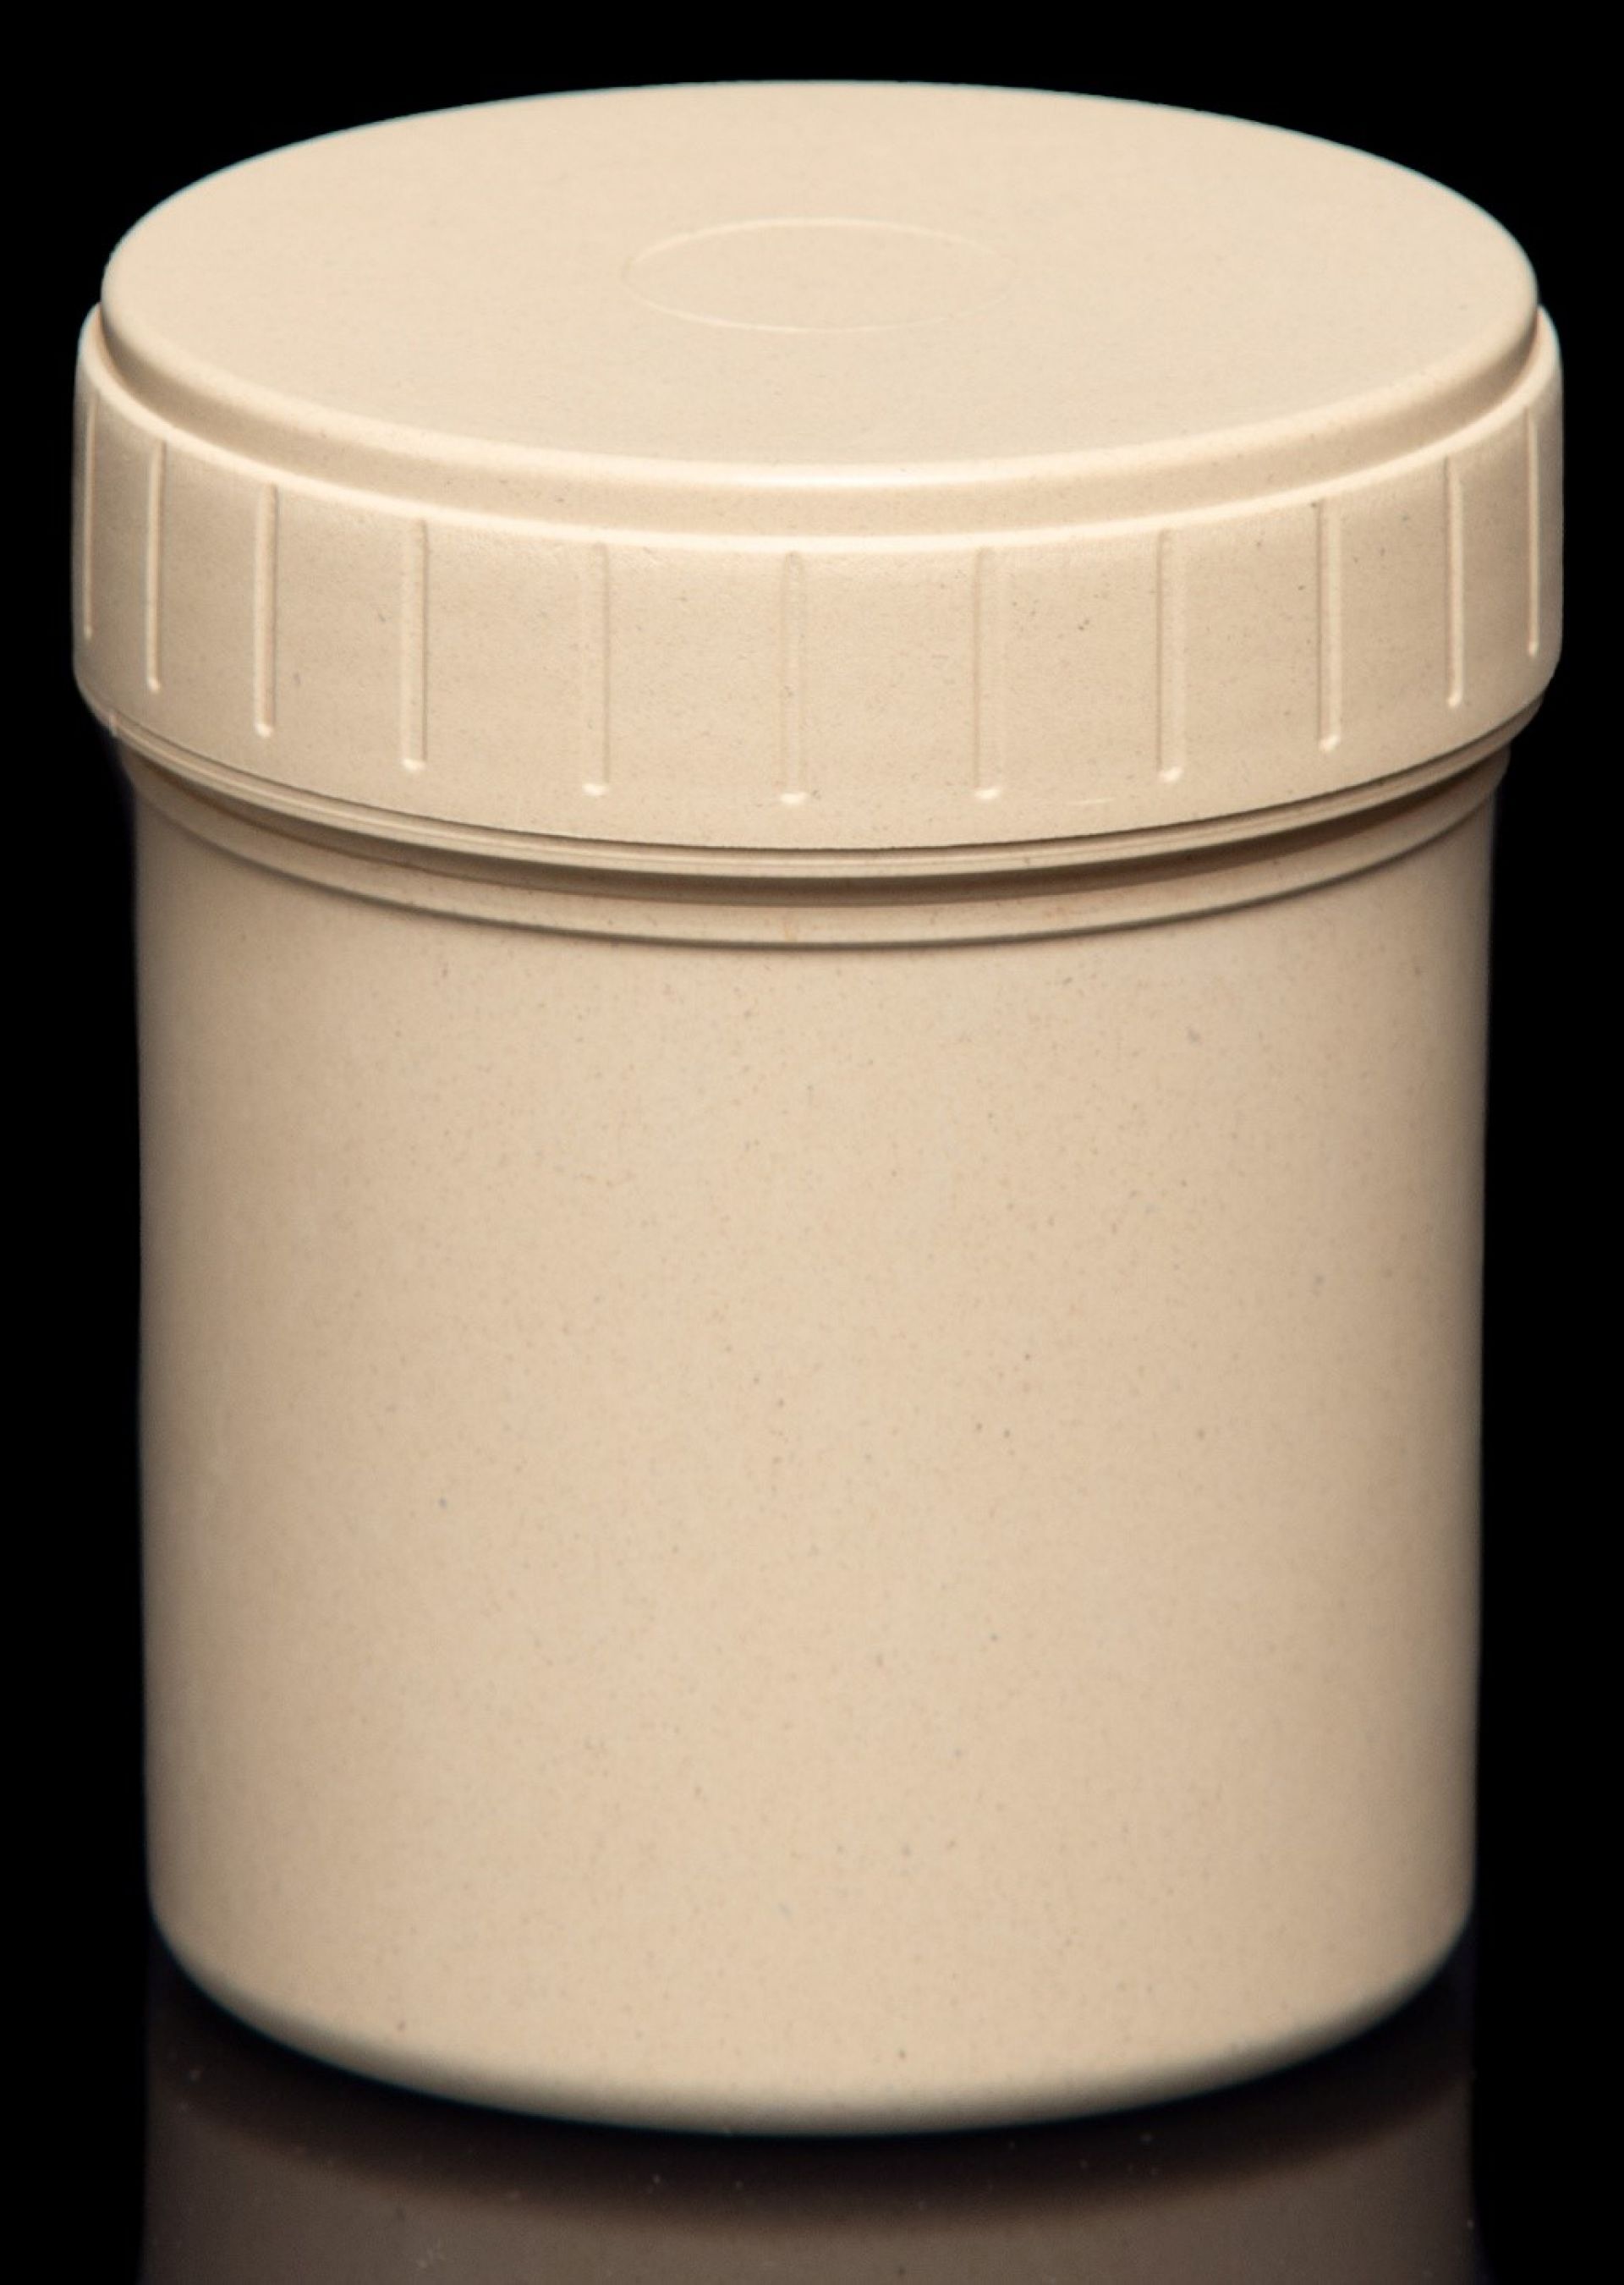 Newly released sustainable packaging - Biodegradable Jar